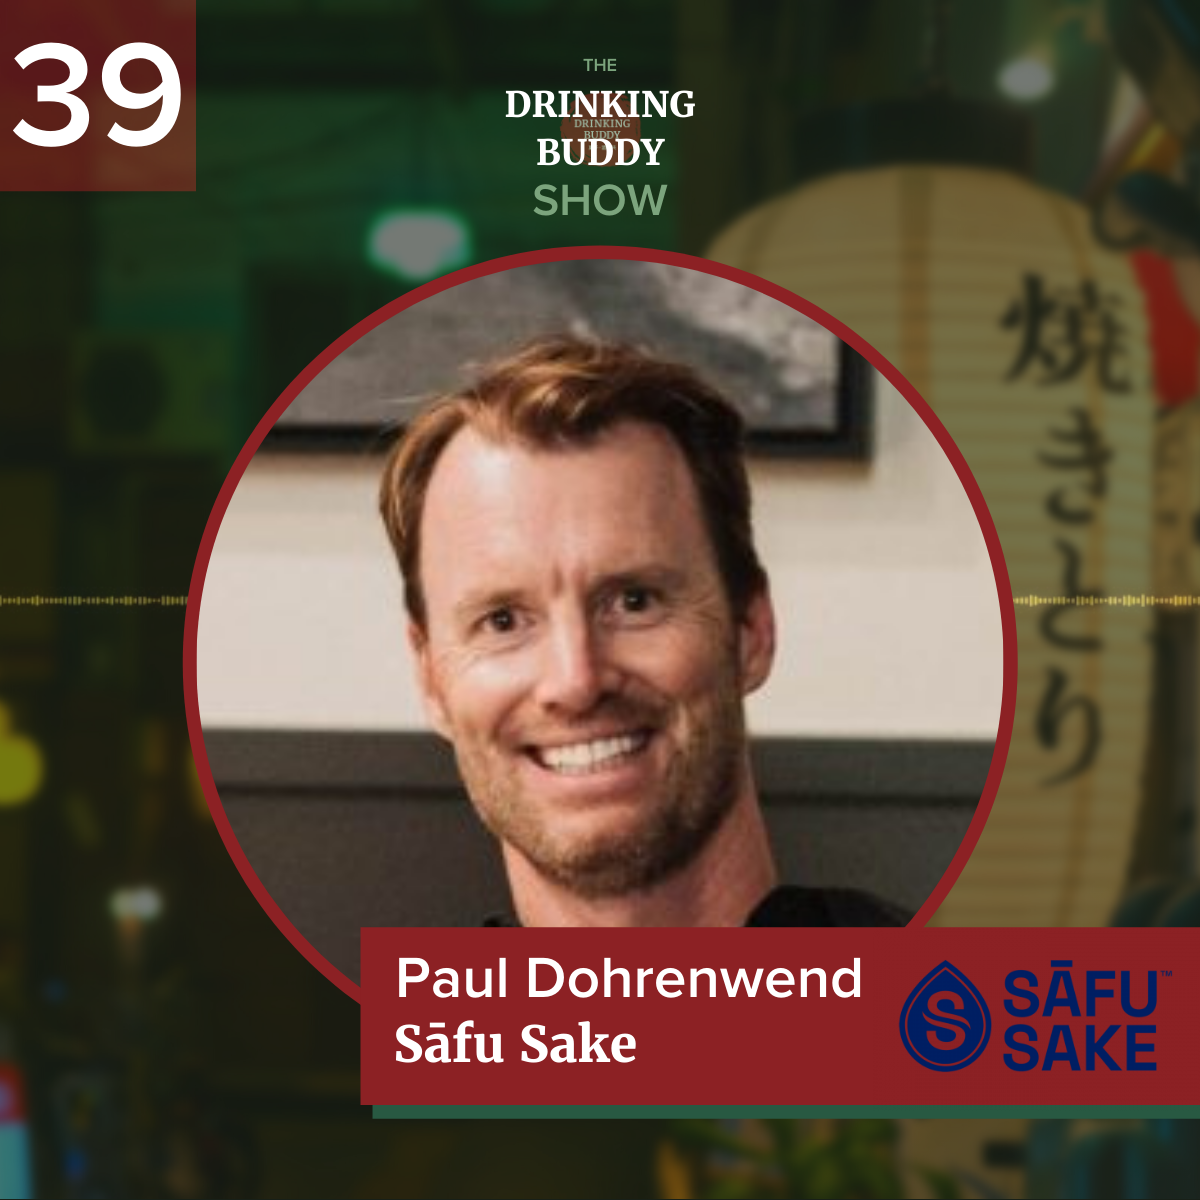 The Drinking Buddy Show Episode 39: Bringing the best of Japan to the US with Paul Dohrenwend and Reina Watanabe of Safu Sake